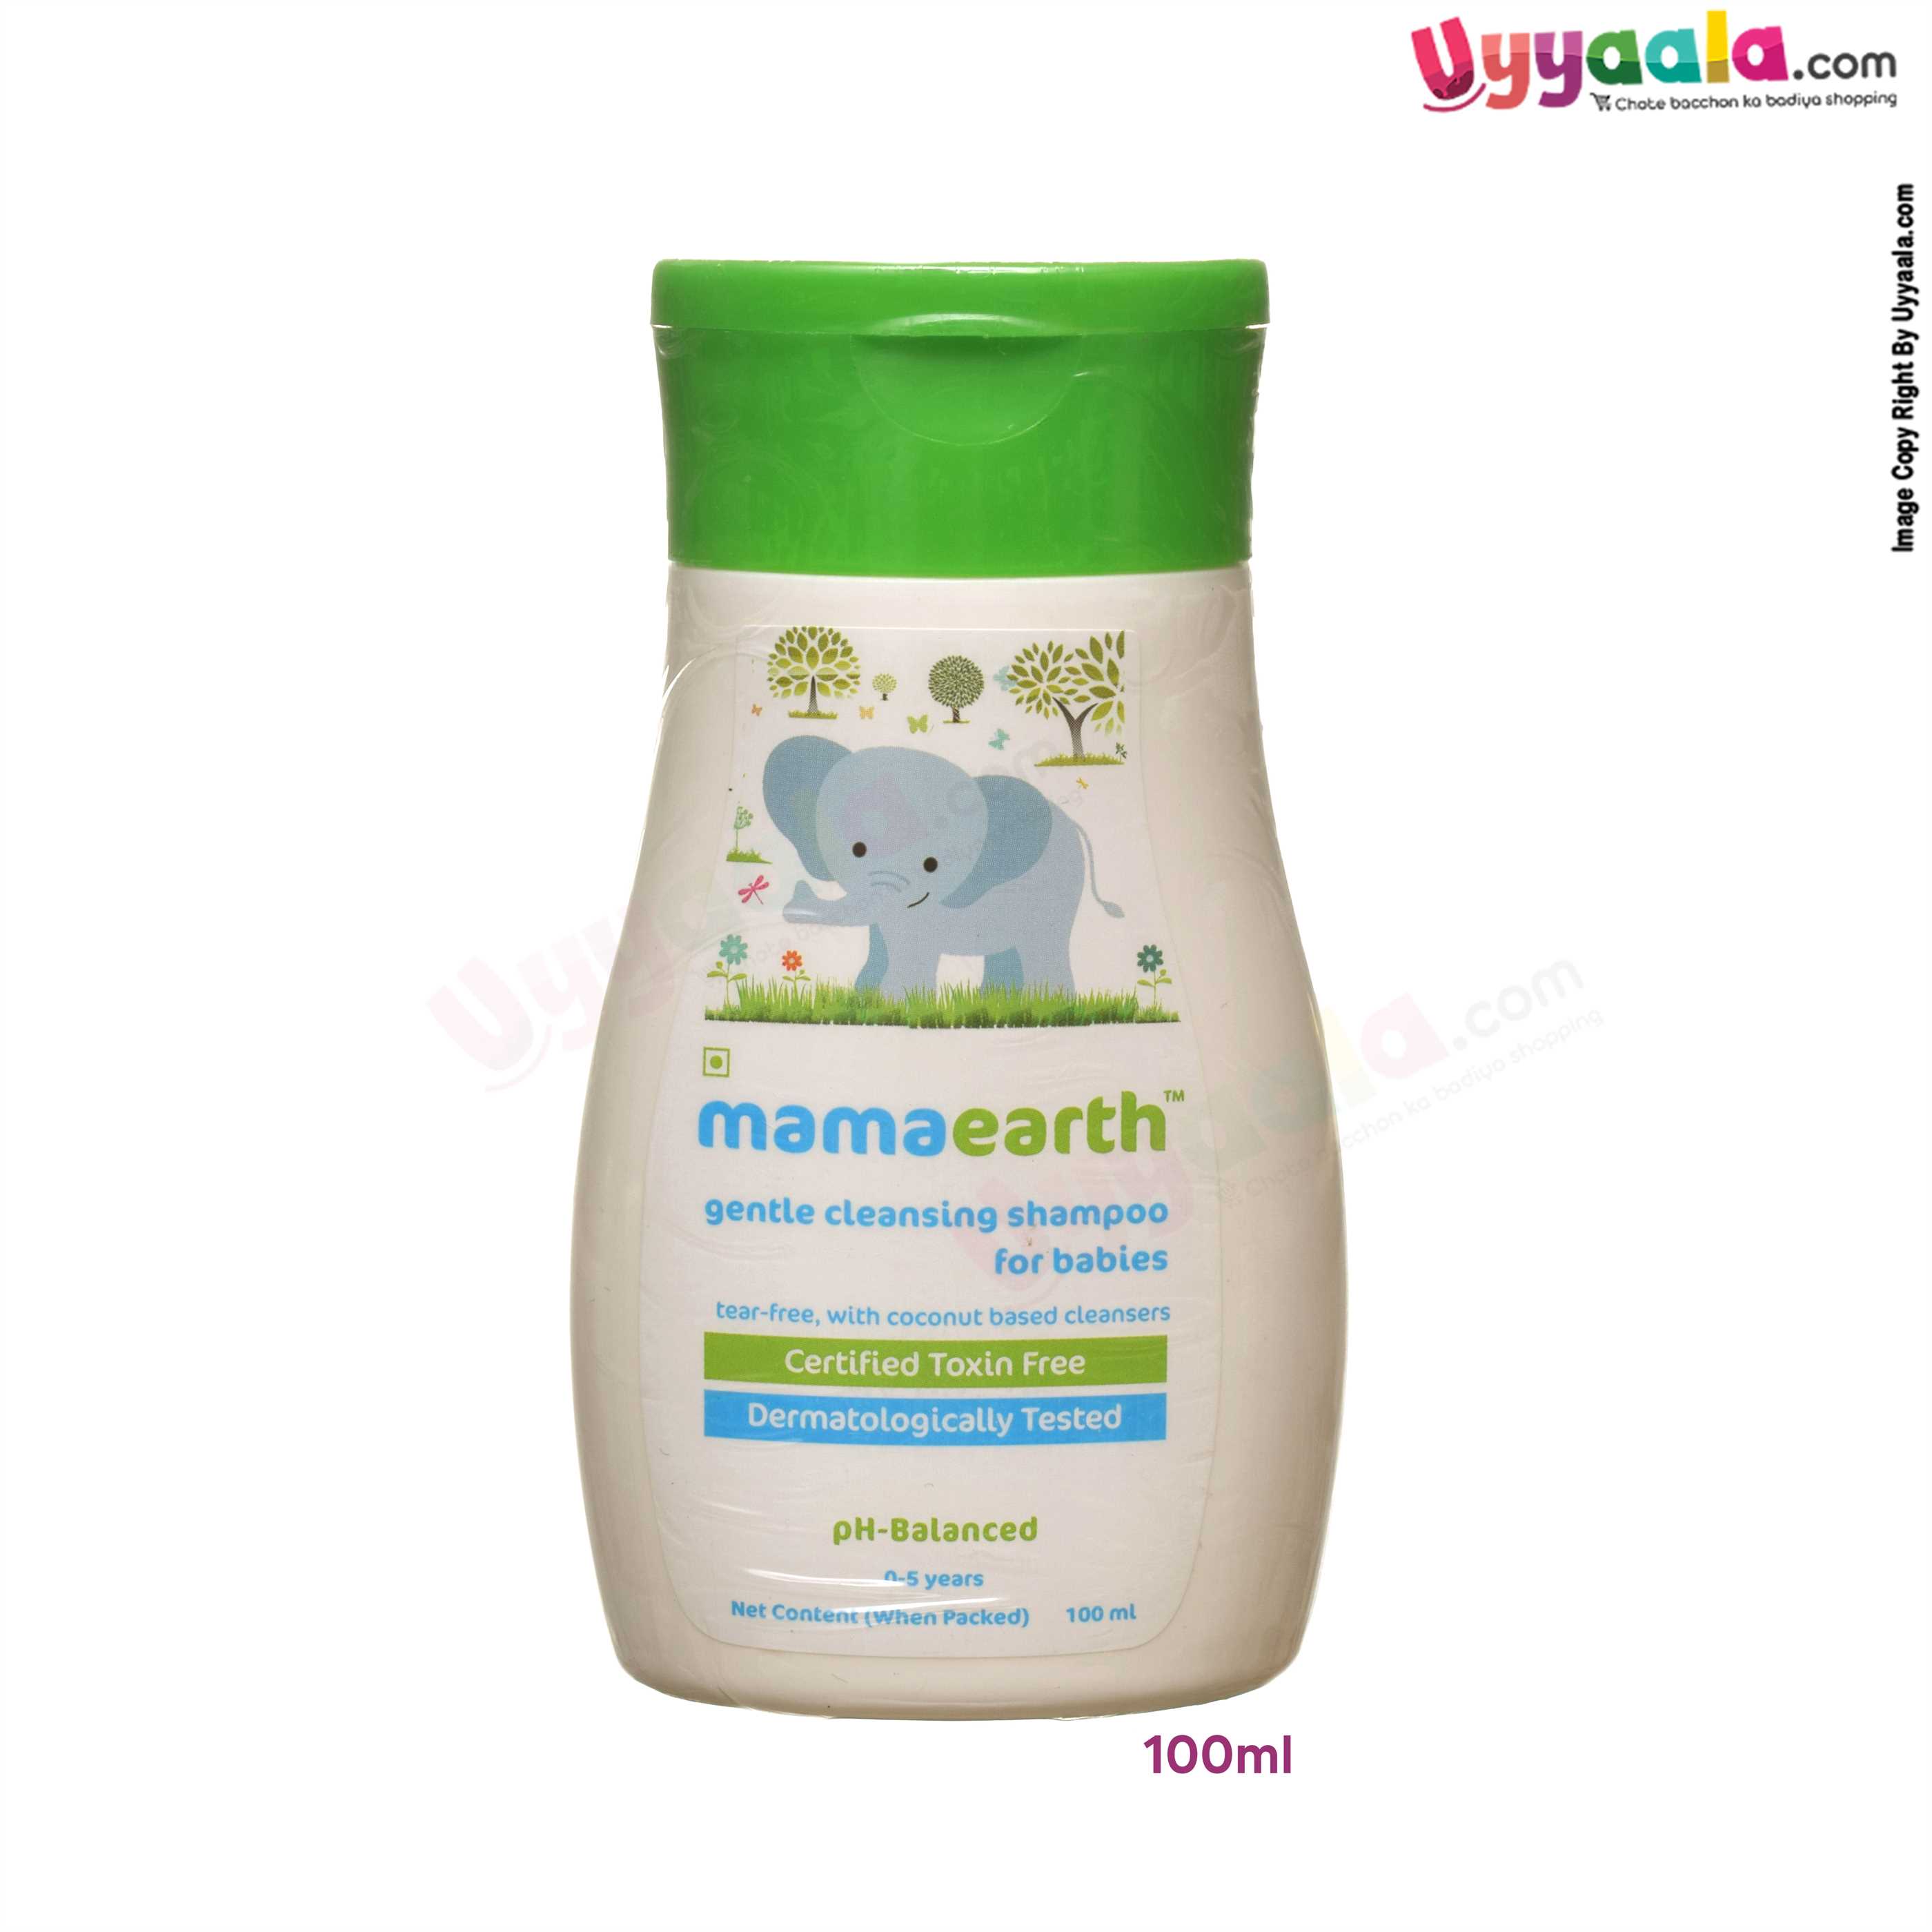 mamaearth Gentle Cleansing Shampoo For Babies